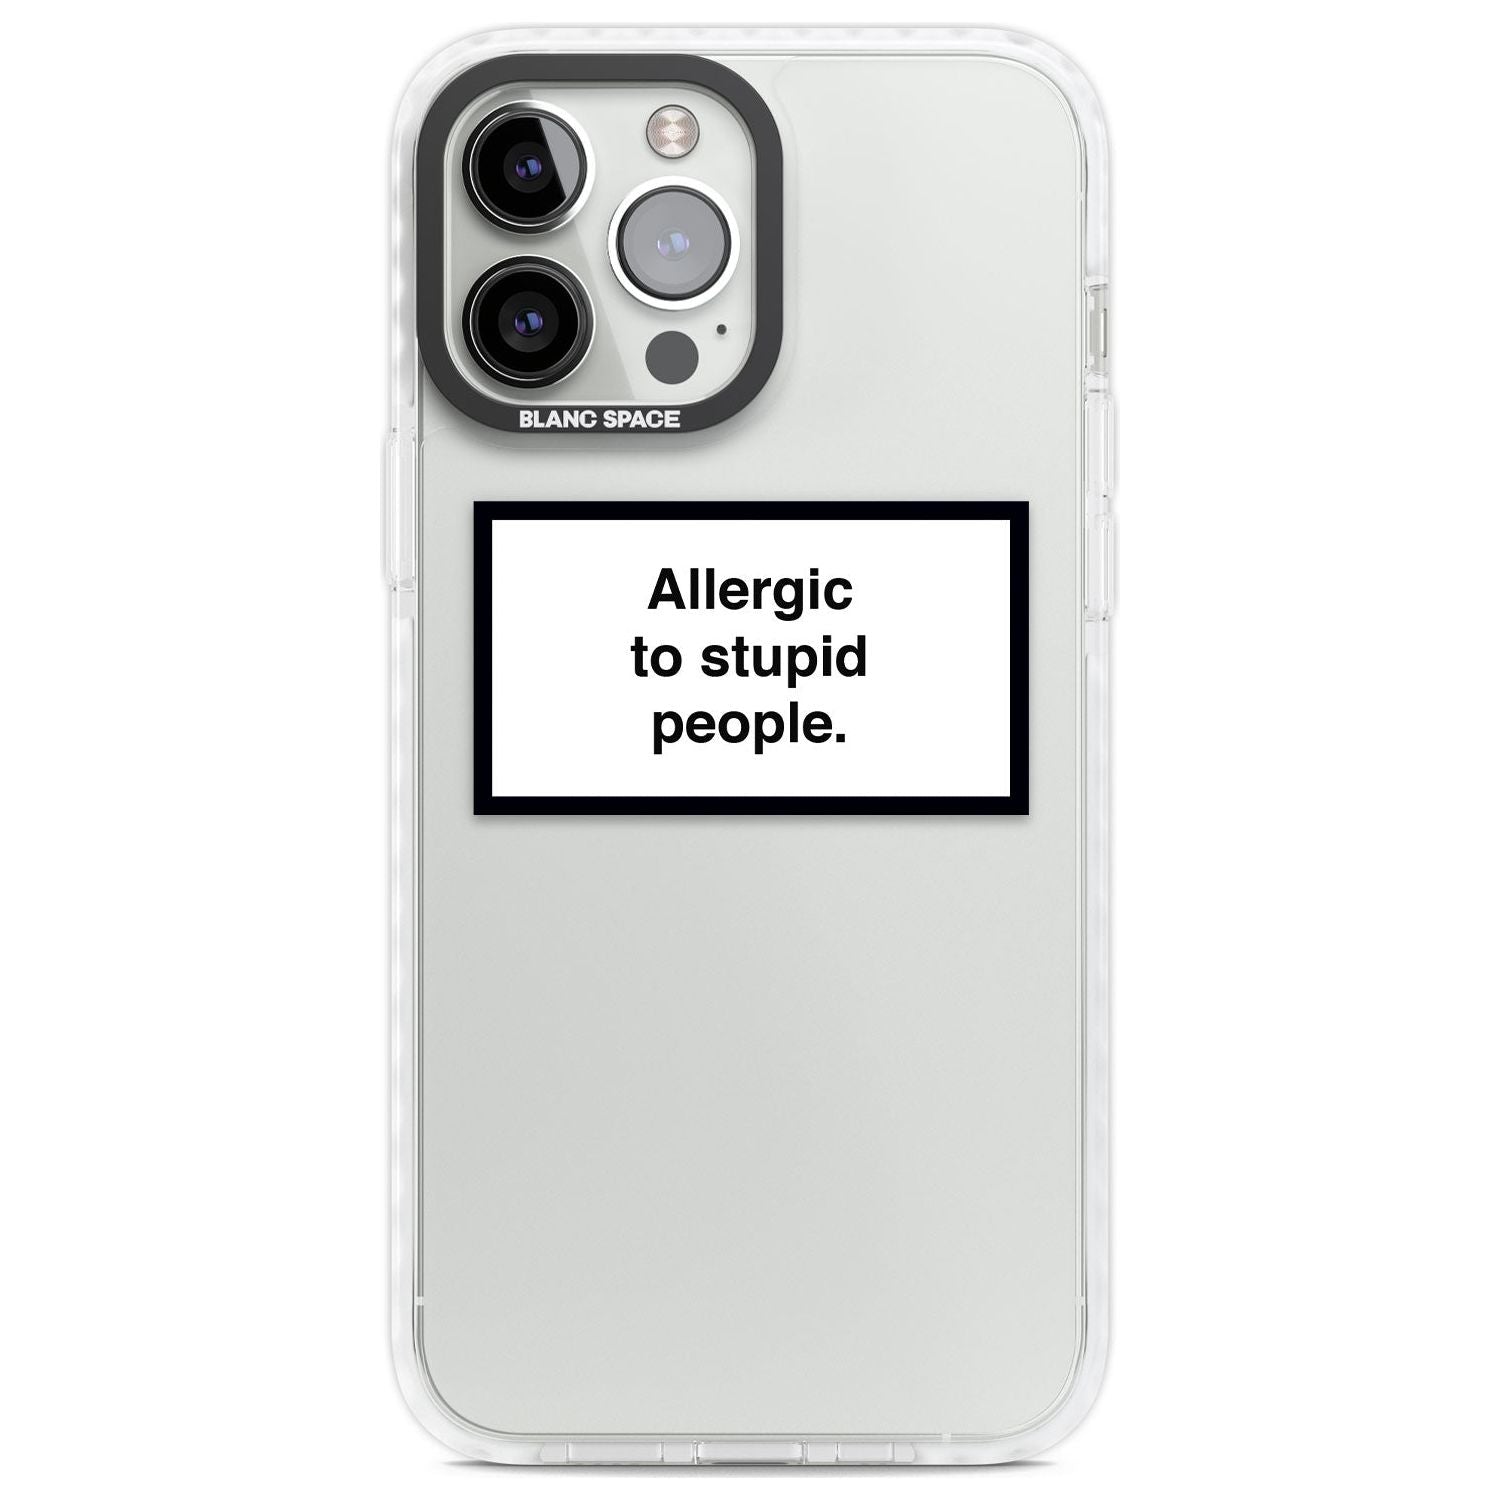 Allergic to stupid people Phone Case iPhone 13 Pro Max / Impact Case,iPhone 14 Pro Max / Impact Case Blanc Space